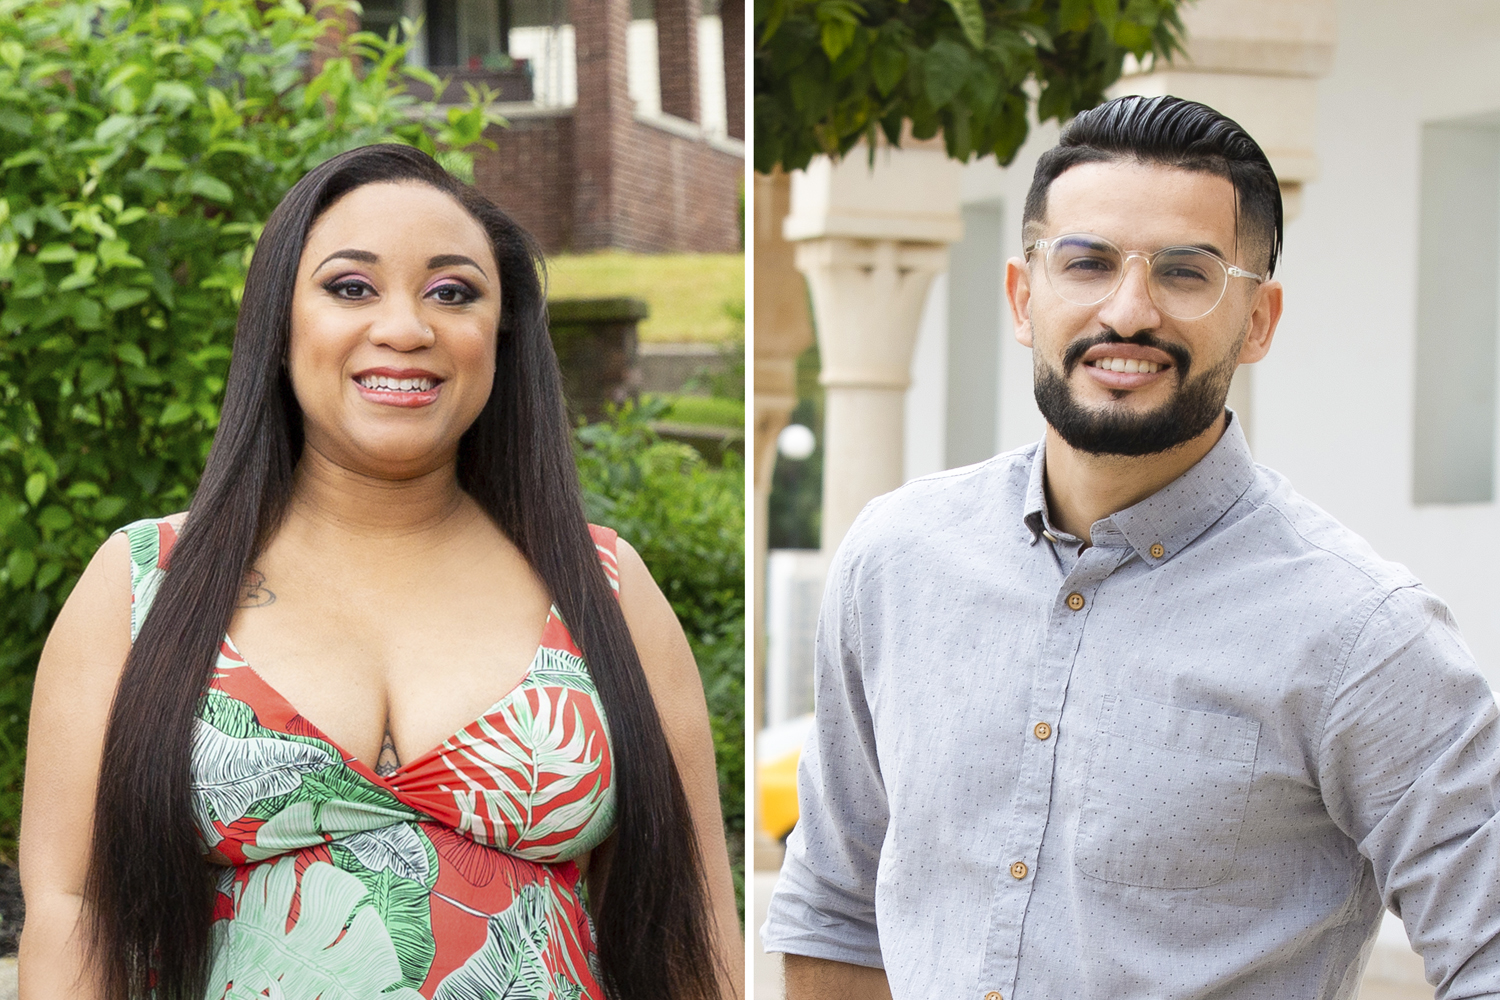 One of the '90 Day Fiancé: Before the 90 Days' Season 5 couples, Memphis and Hamza, is seen here in a floral dress and a button down shirt.